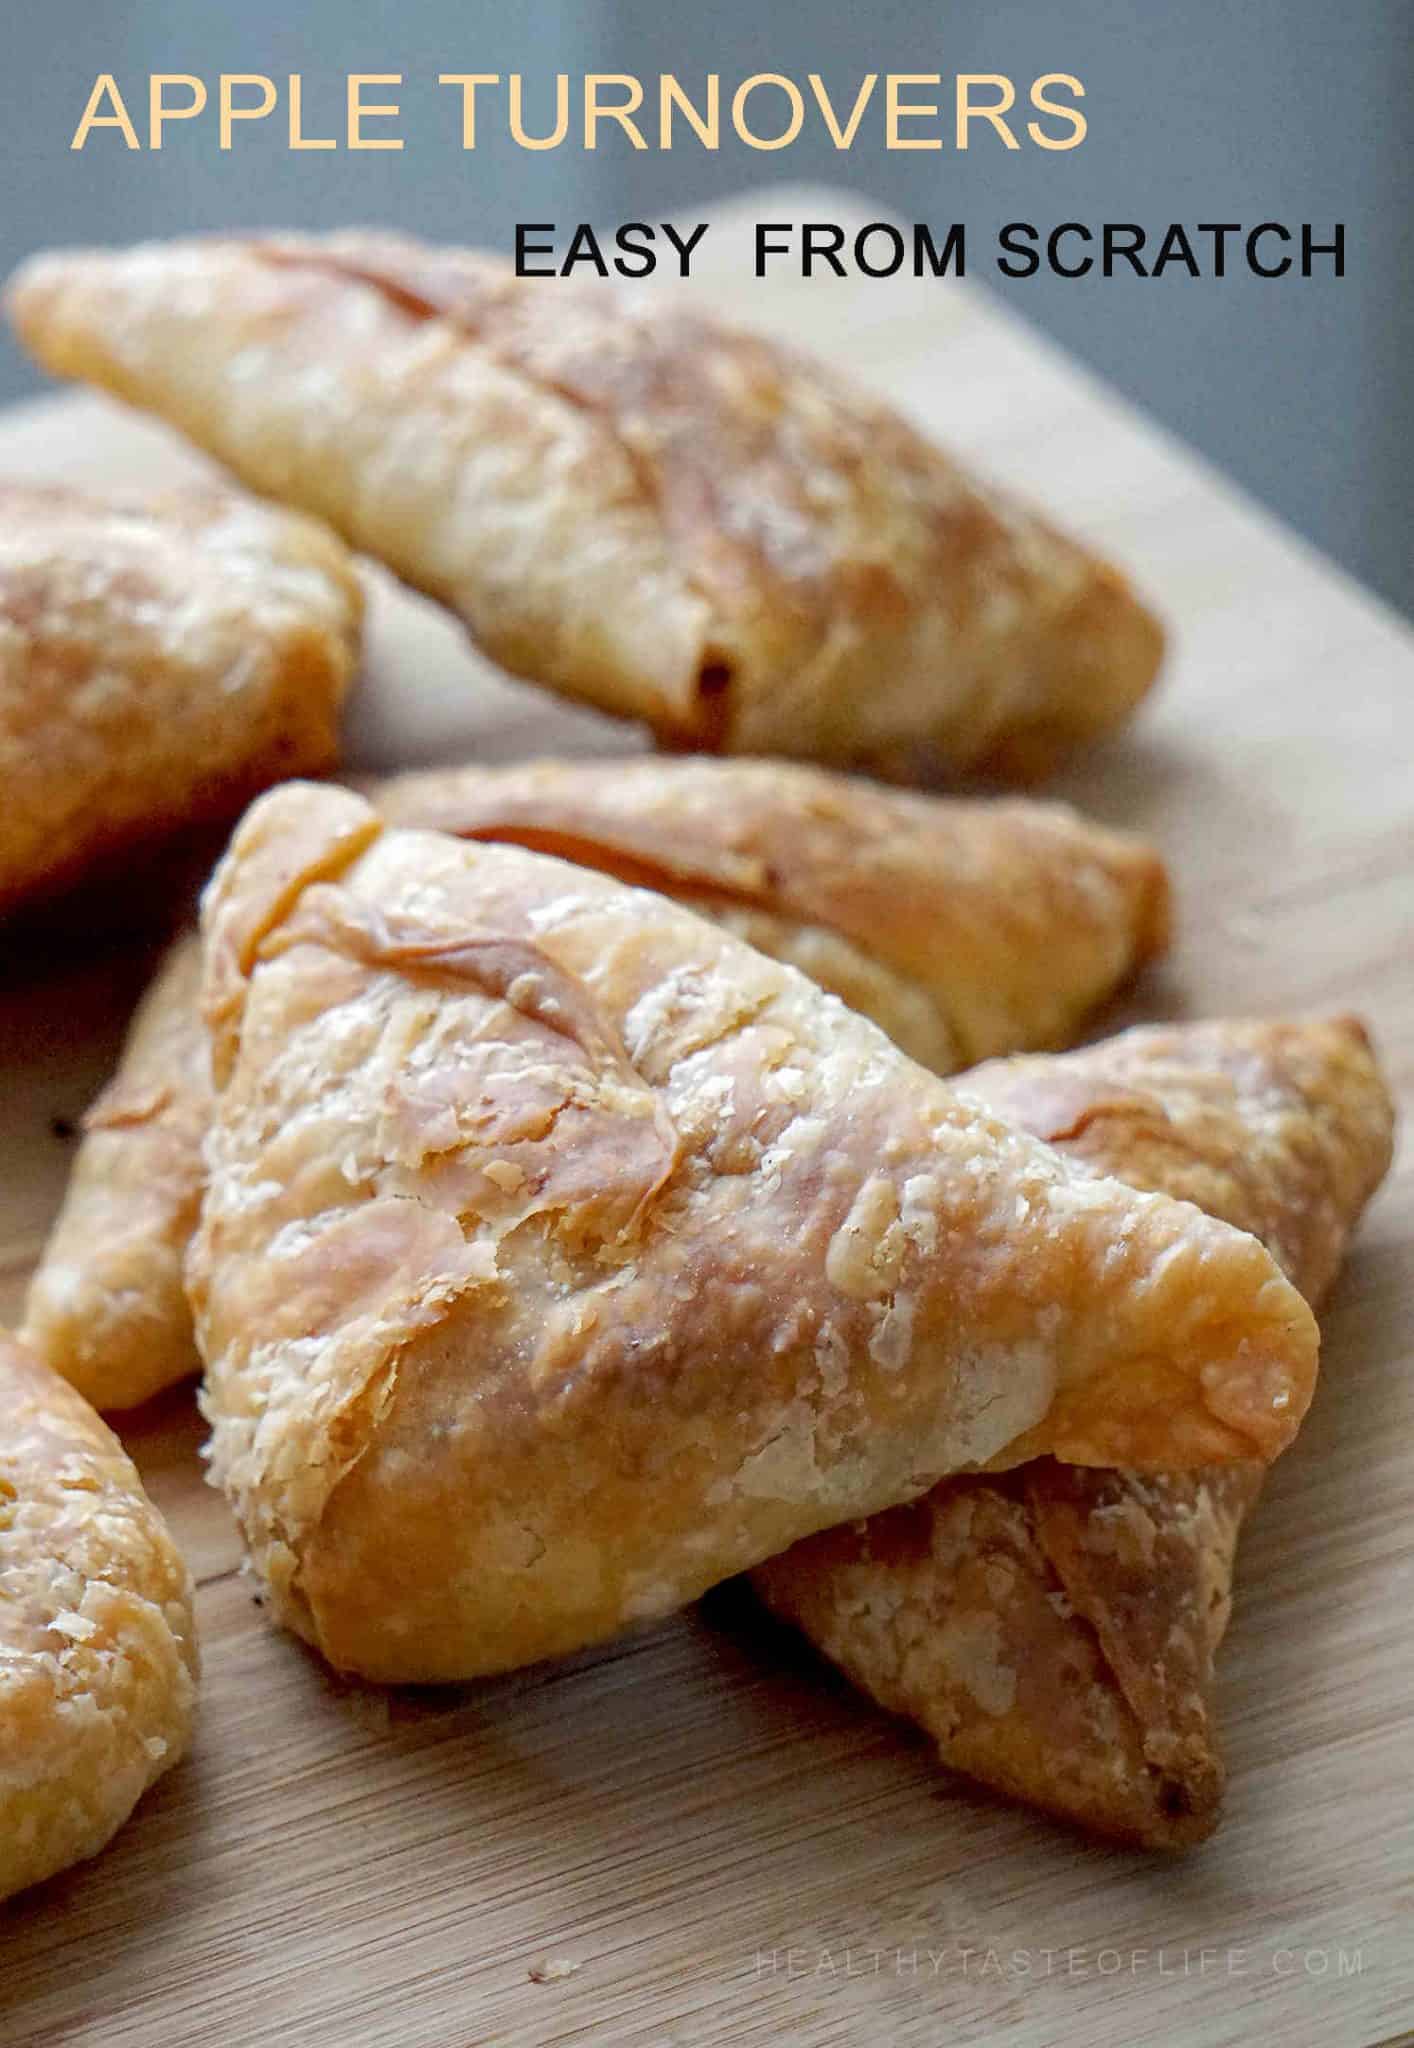 Easy Homemade Puff Pastry From Scratch: Healthy, Sweet / Savory ...